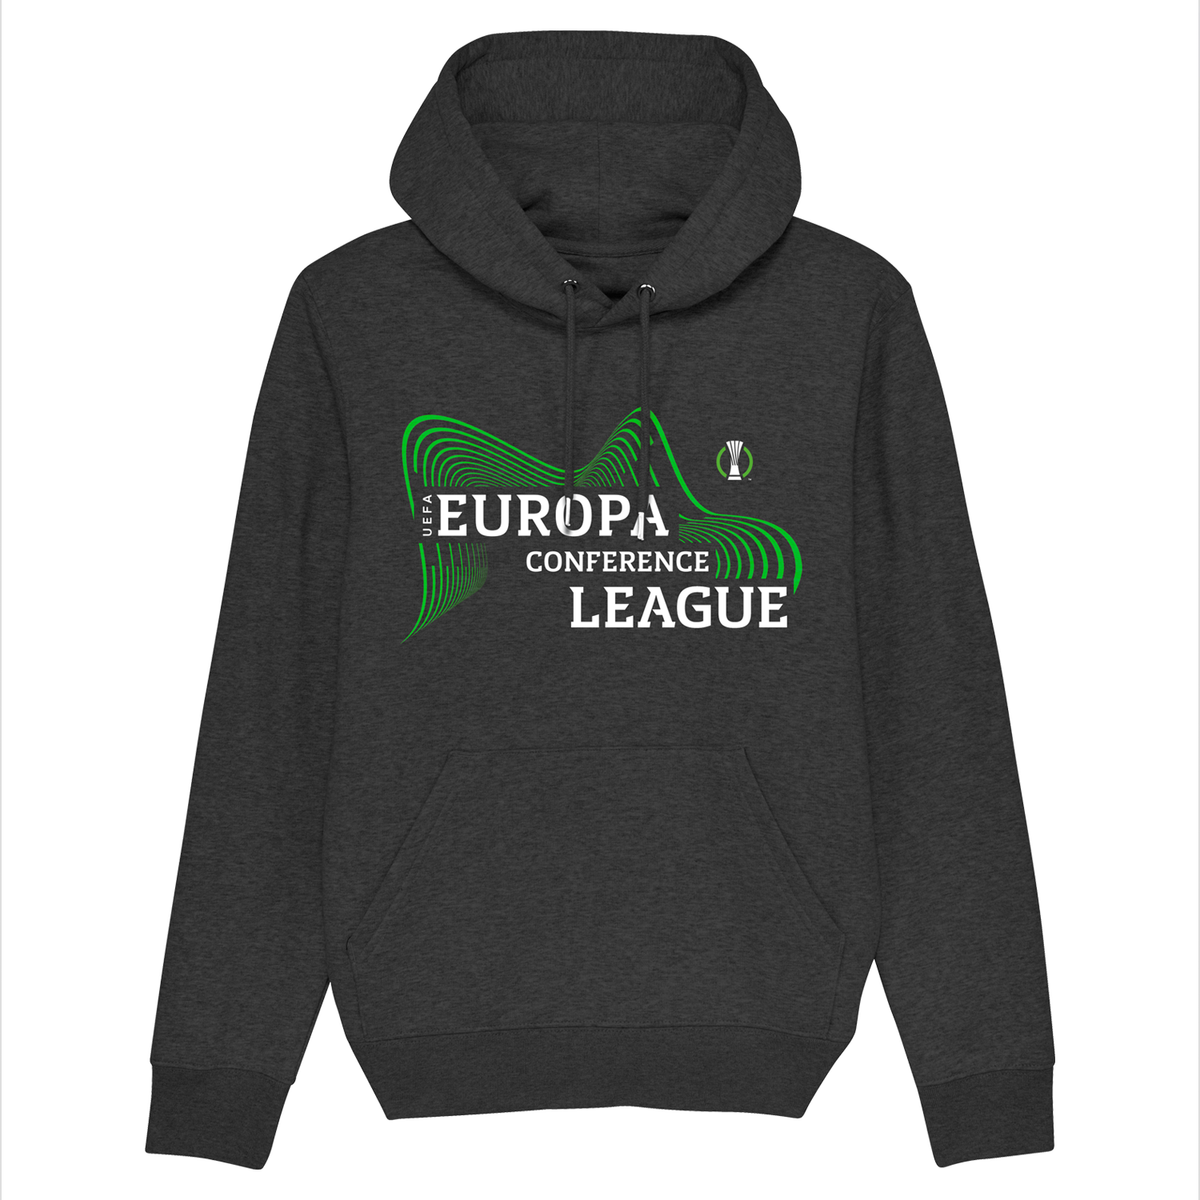 UEFA Europa Conference League - Energy Wave Dark Grey Hoodie UEFA Club Competitions Online Store